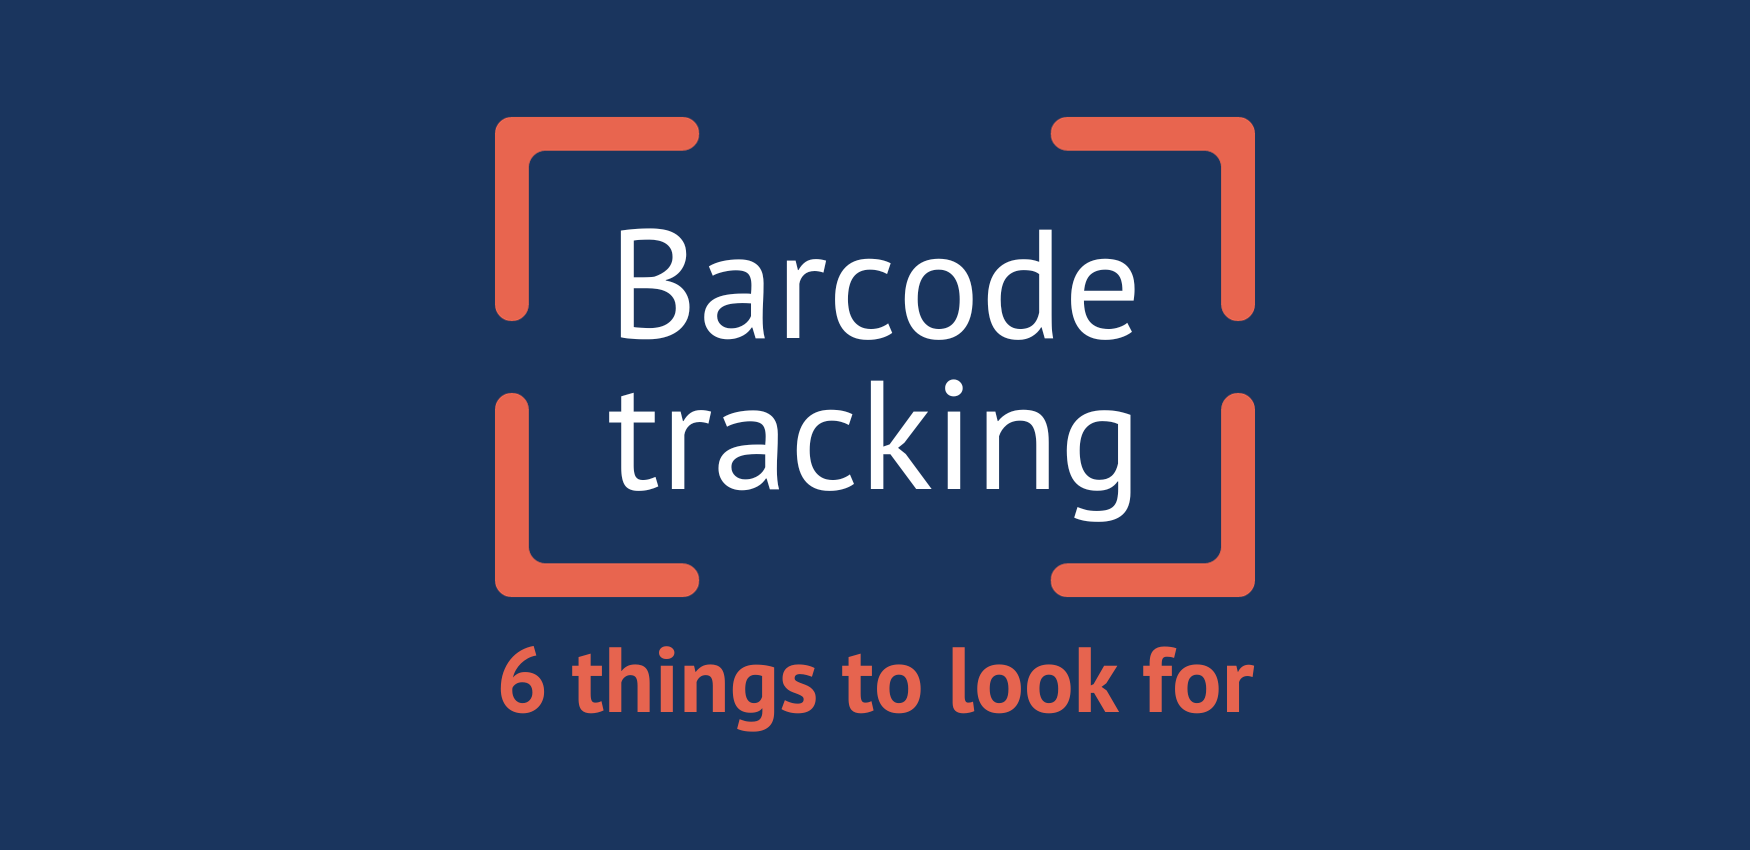 6 Things to Look for in a Barcode Tracking Tool